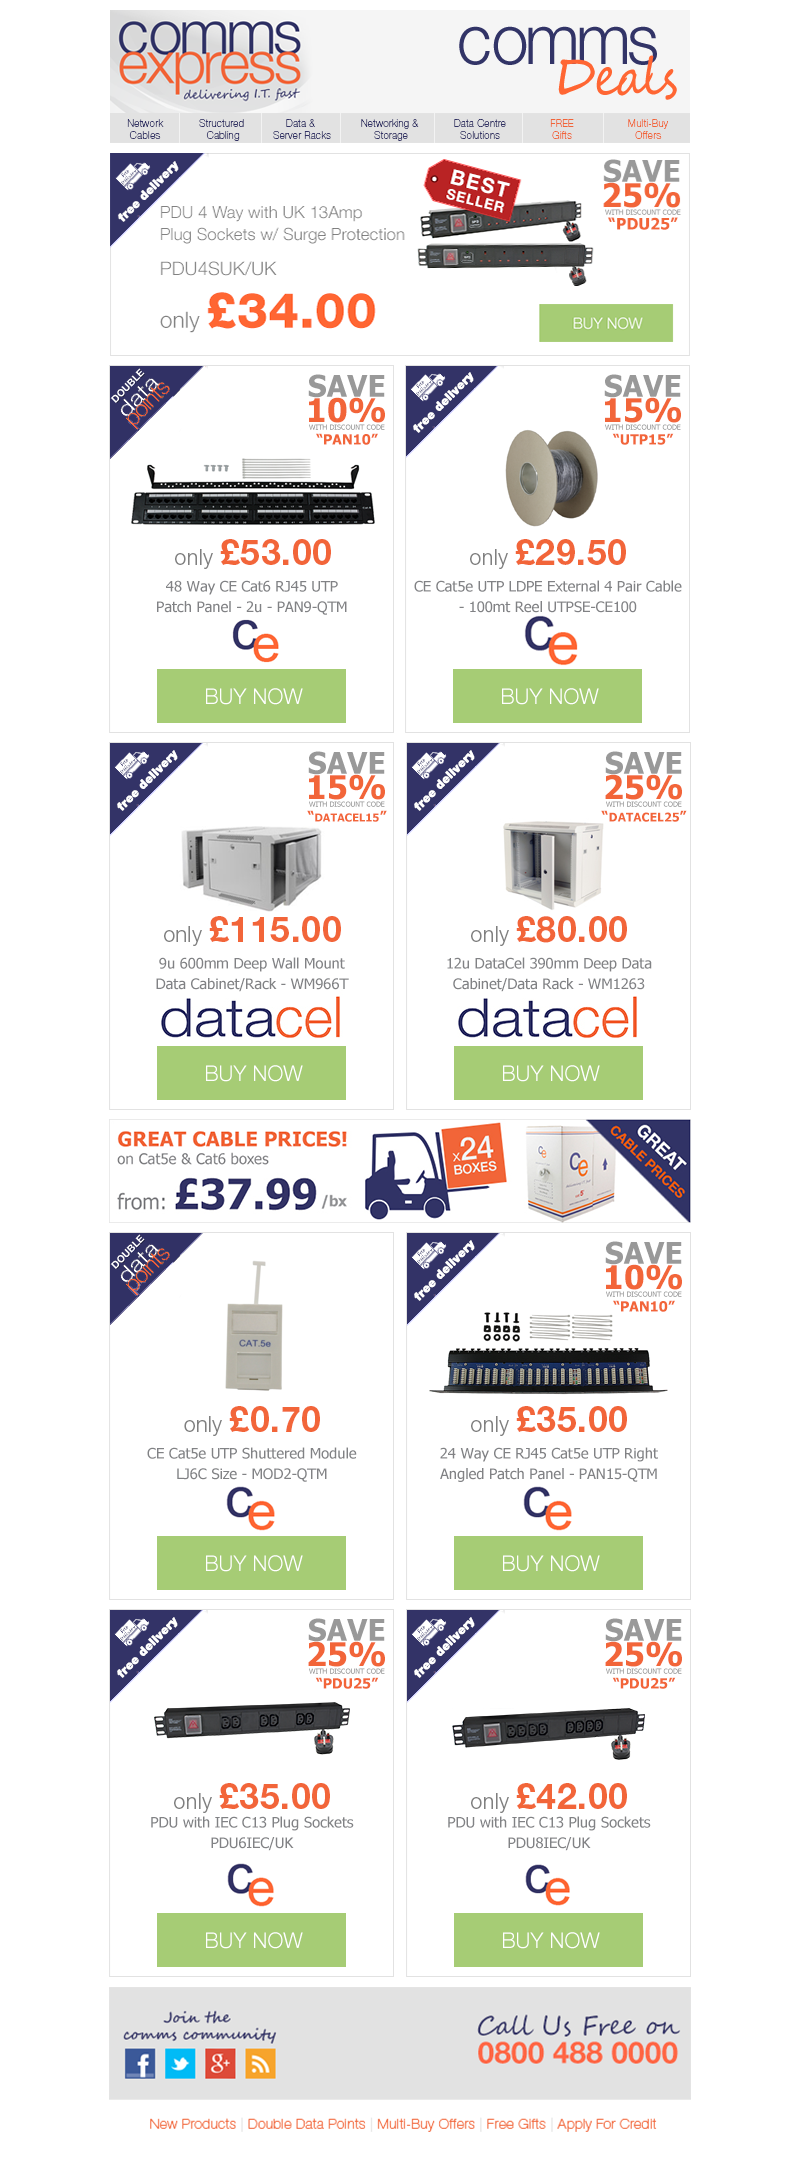 Comms Deals: Great Savings on CE Network Solutions & Da